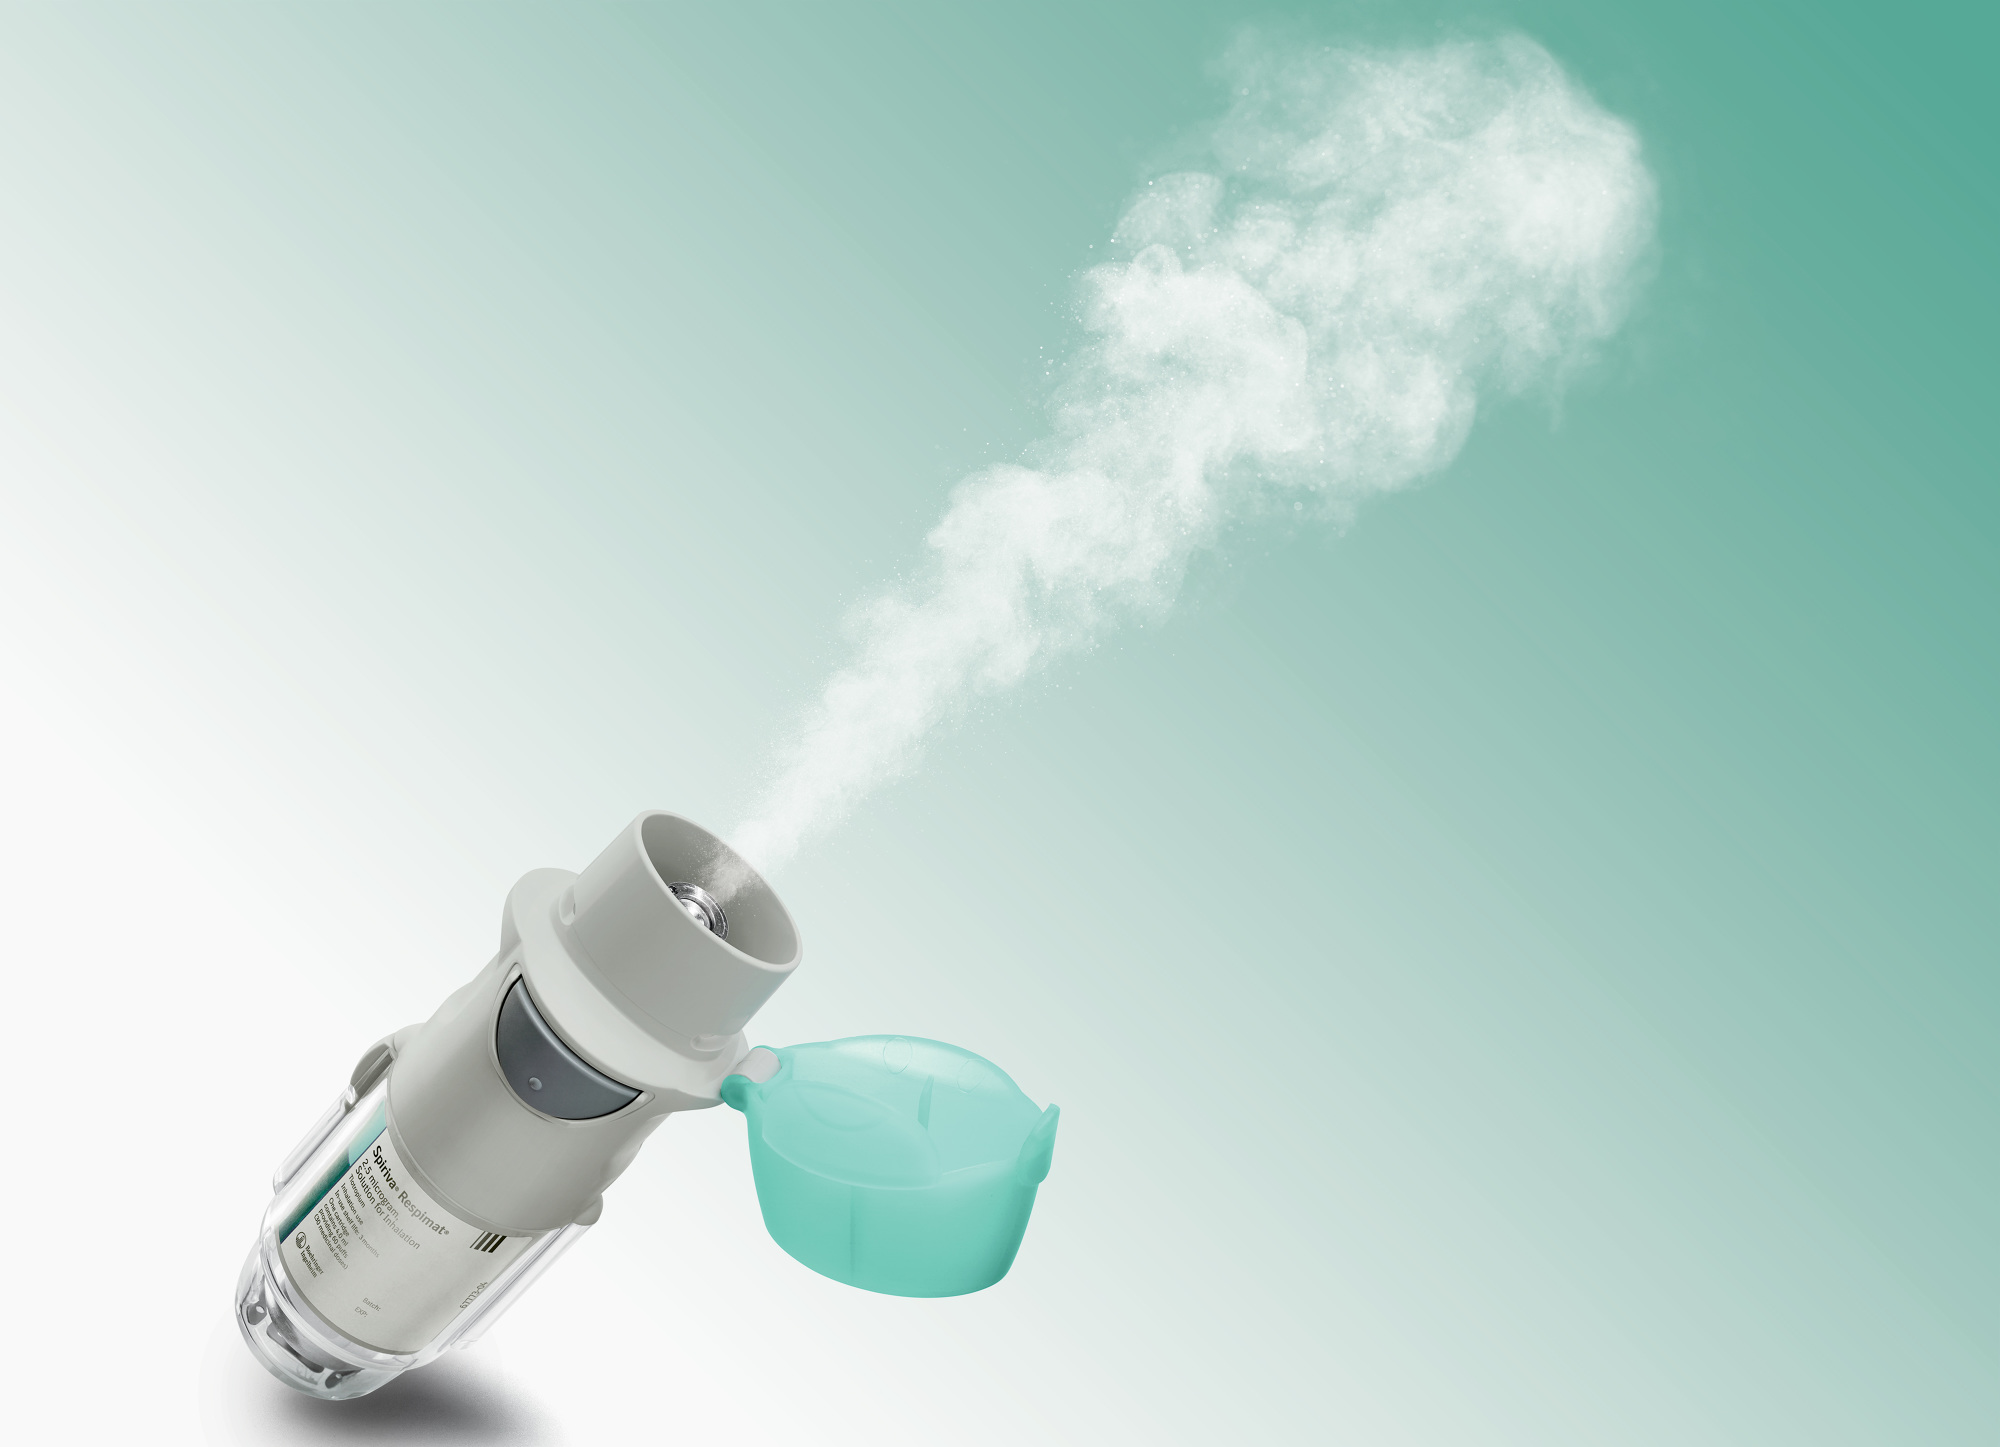 Spiriva Respimat Safe as AddOn Therapy for Young Asthmatics